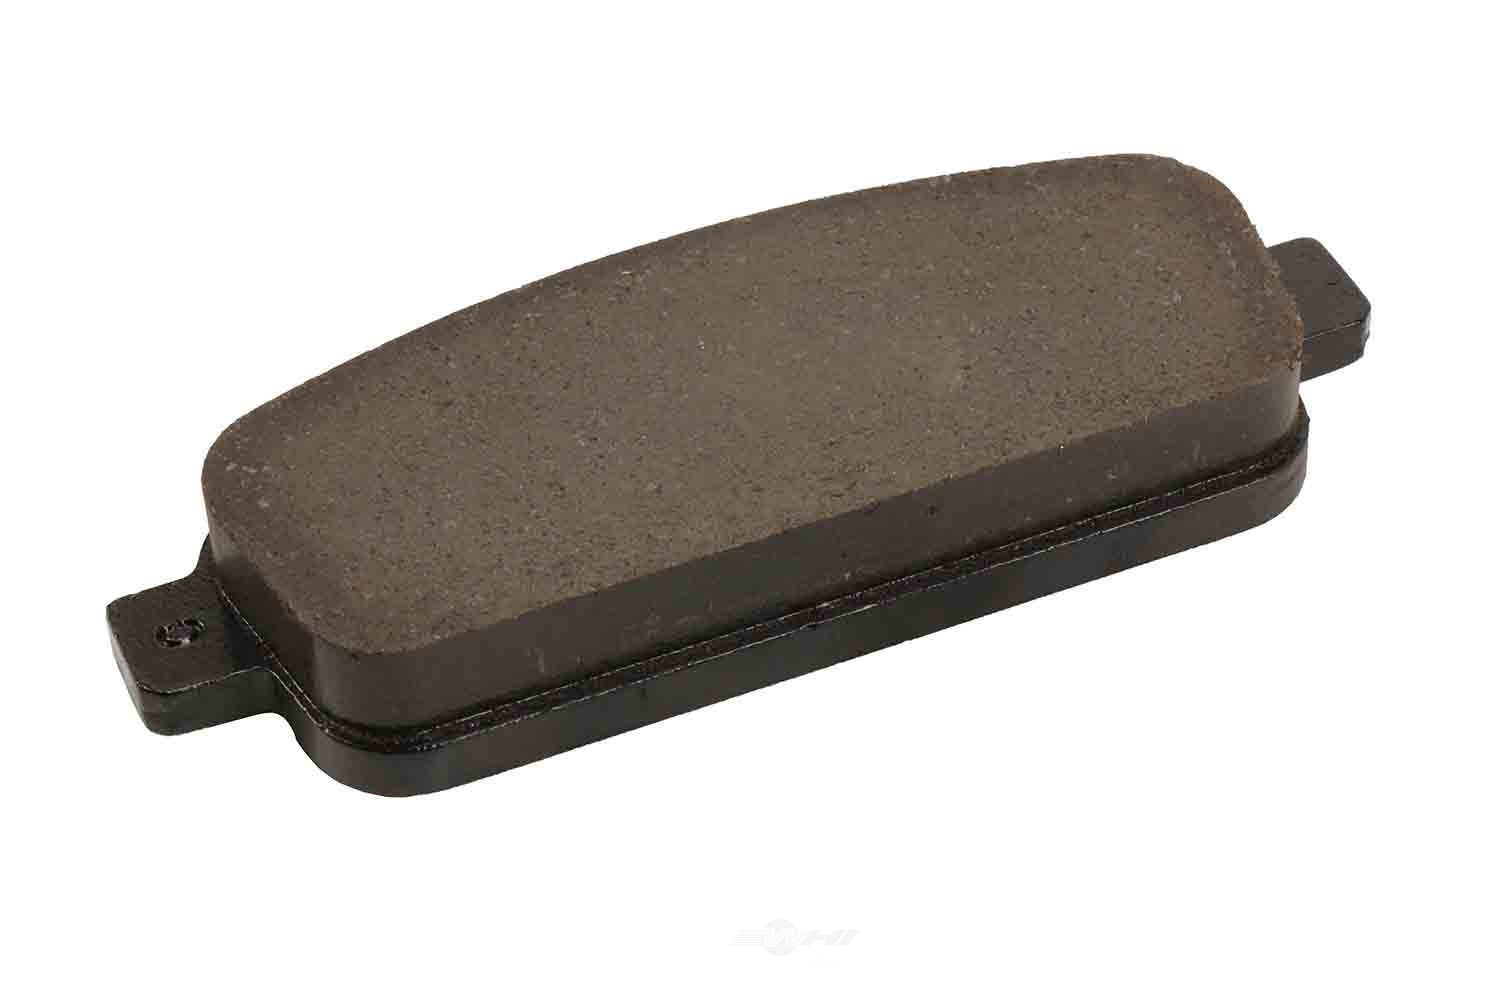 GM GENUINE PARTS - Disc Brake Pad Set (With ABS Brakes, Rear) - GMP 171-1198